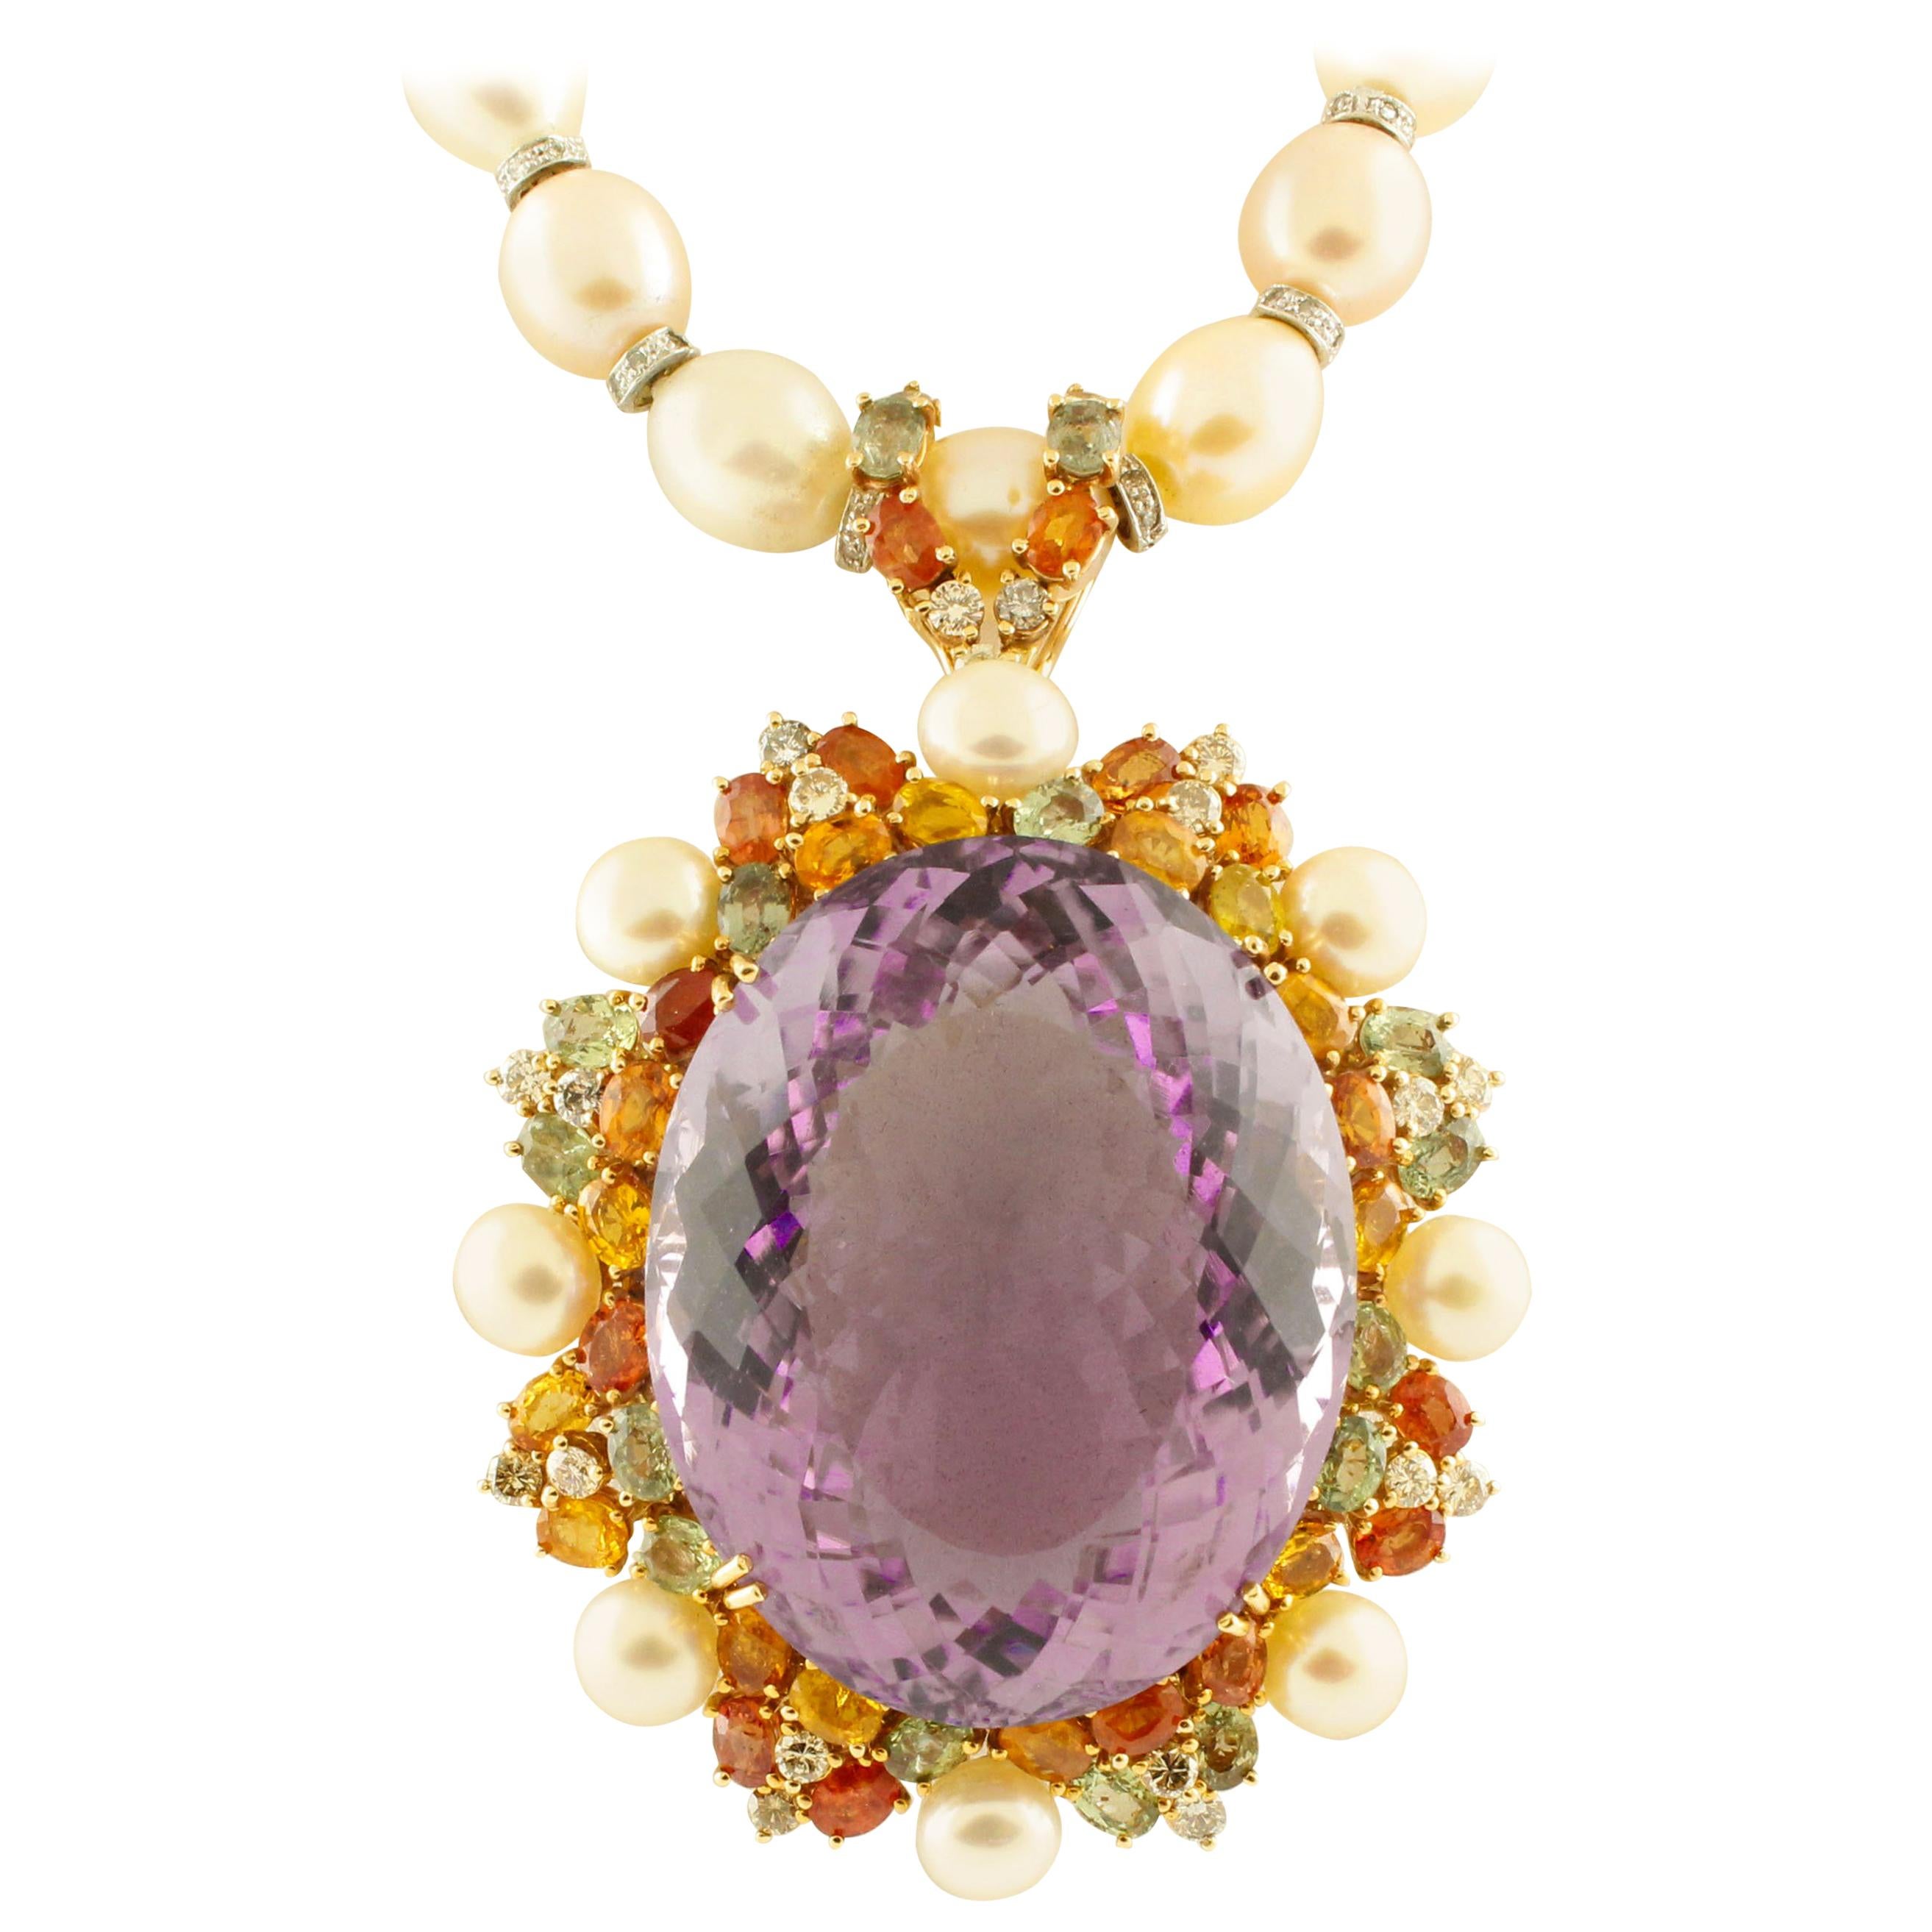 Diamonds Multicolored Sapphires Amethyst White, Light-Pink Pearls Necklace For Sale